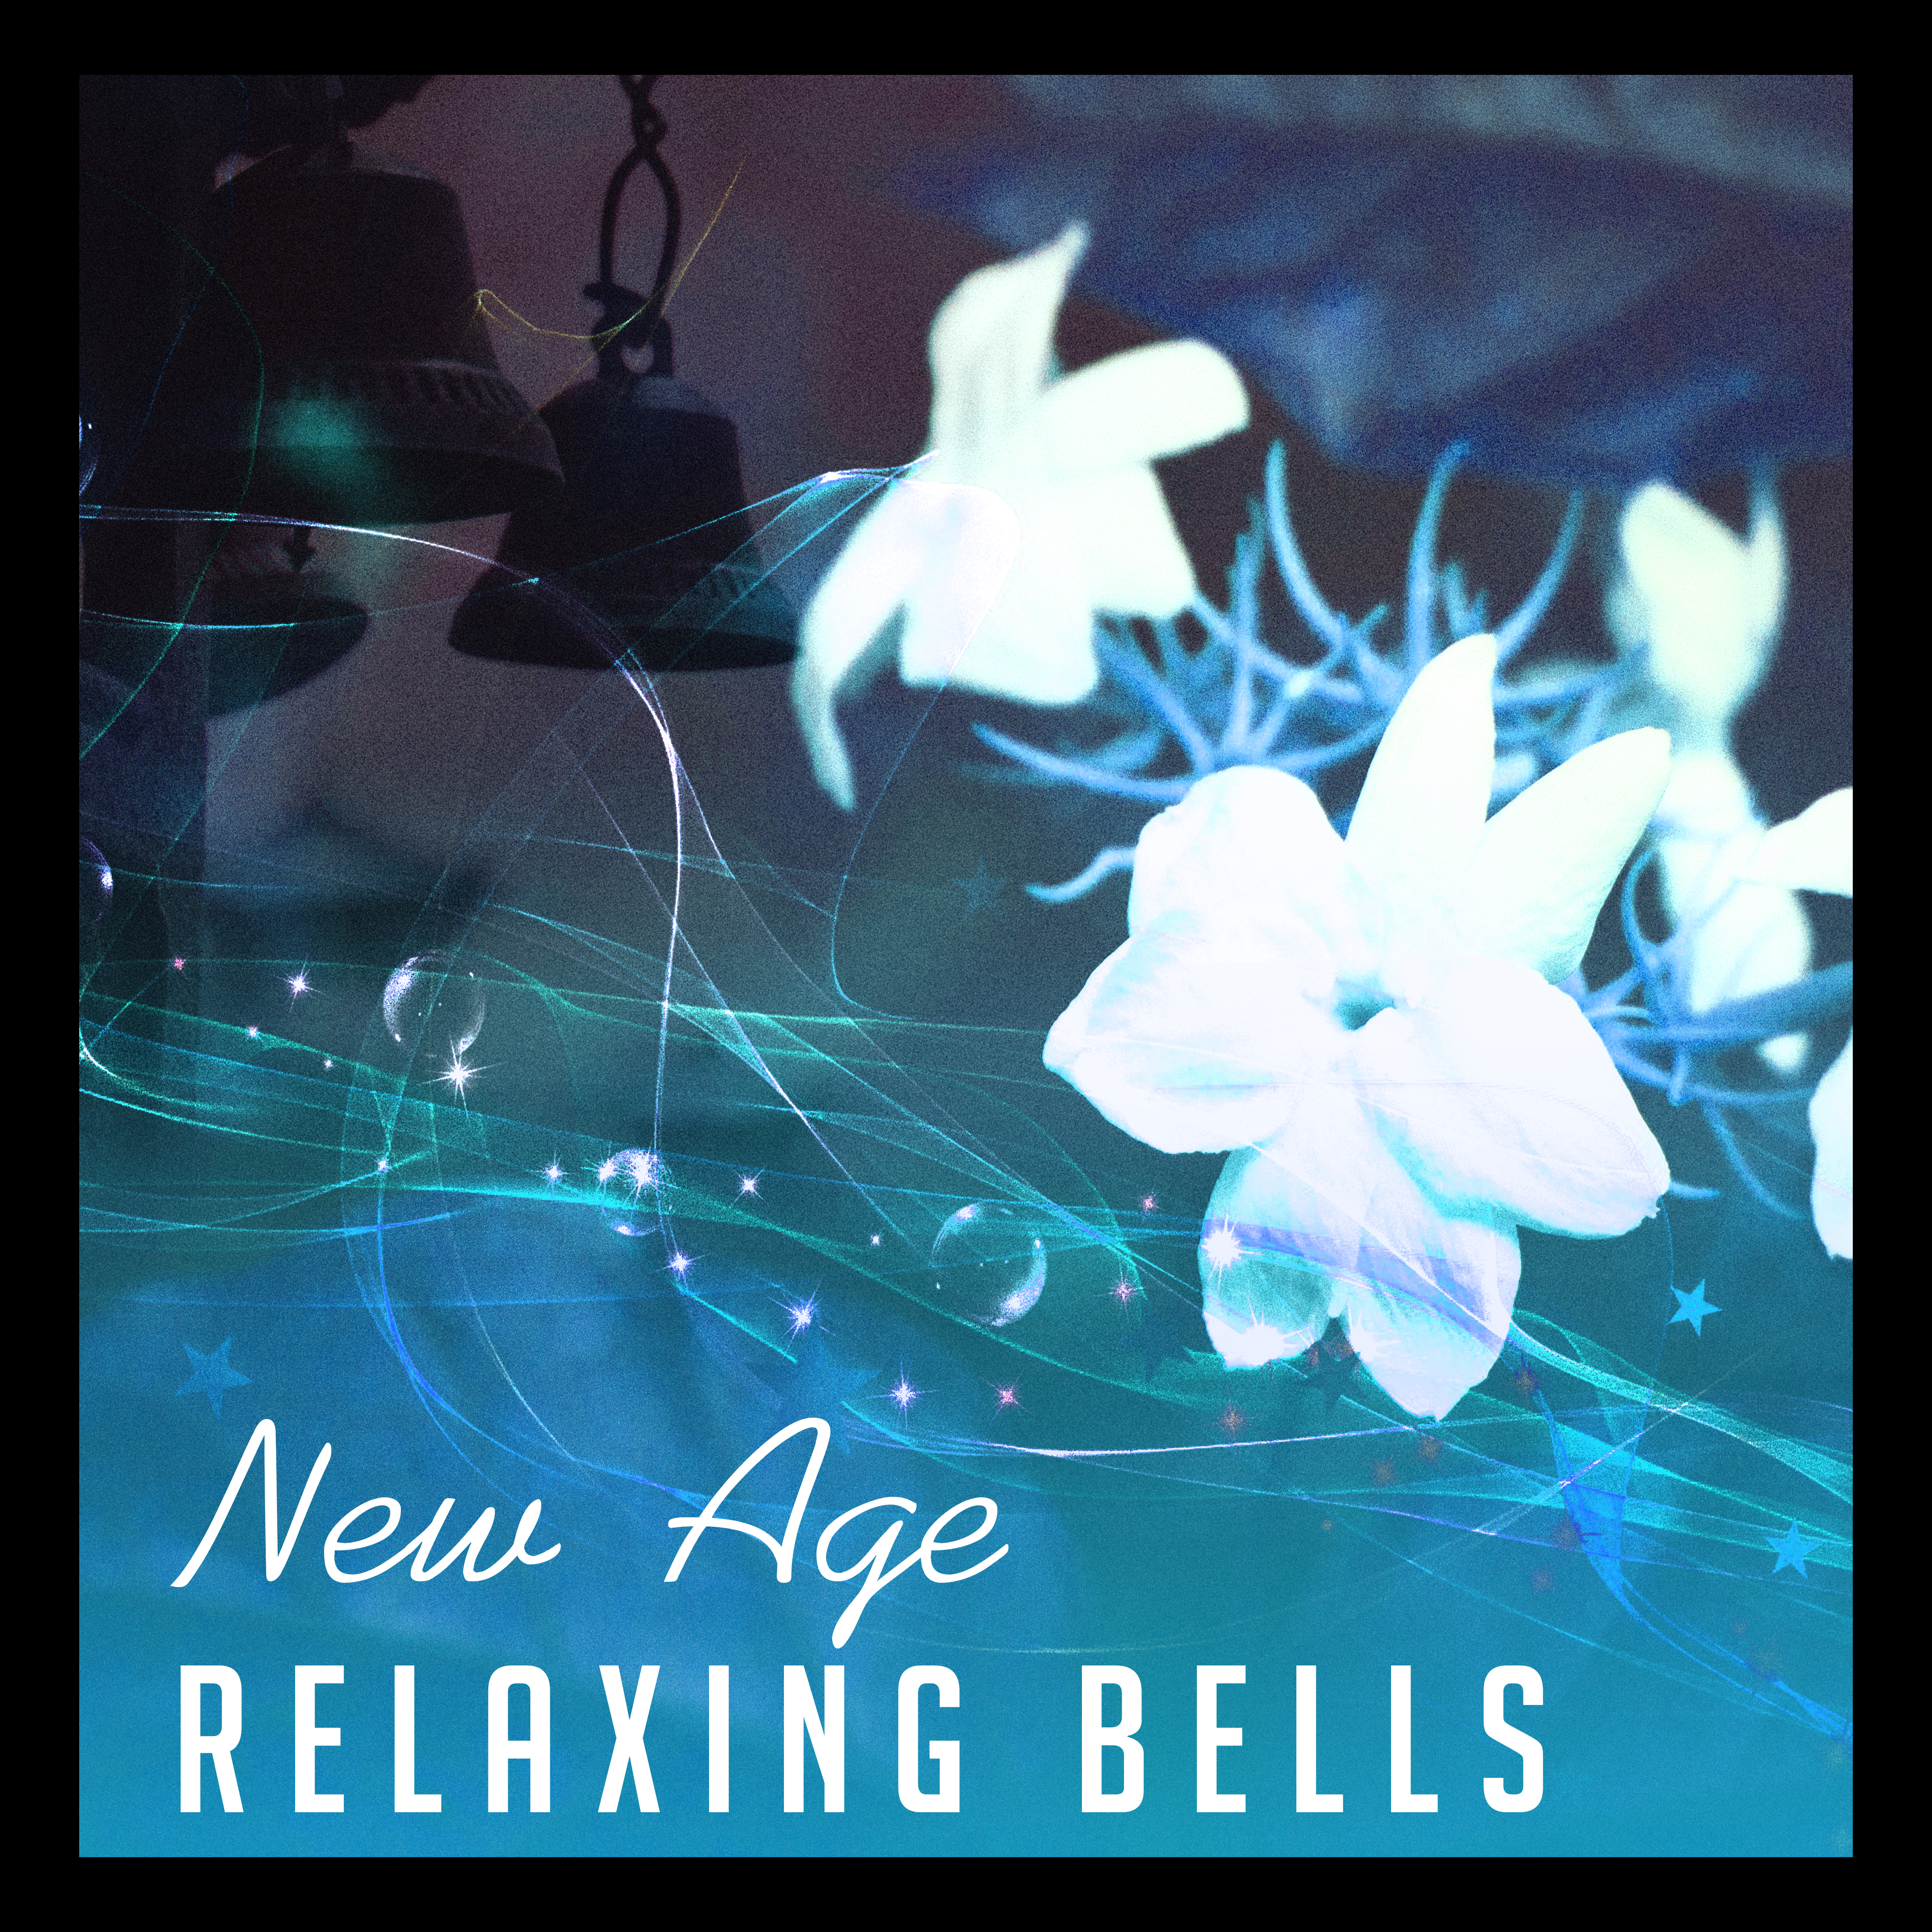 New Age Relaxing Bells  Soothing Sounds, Time to Calm Down, Peaceful Day, Chilled Music